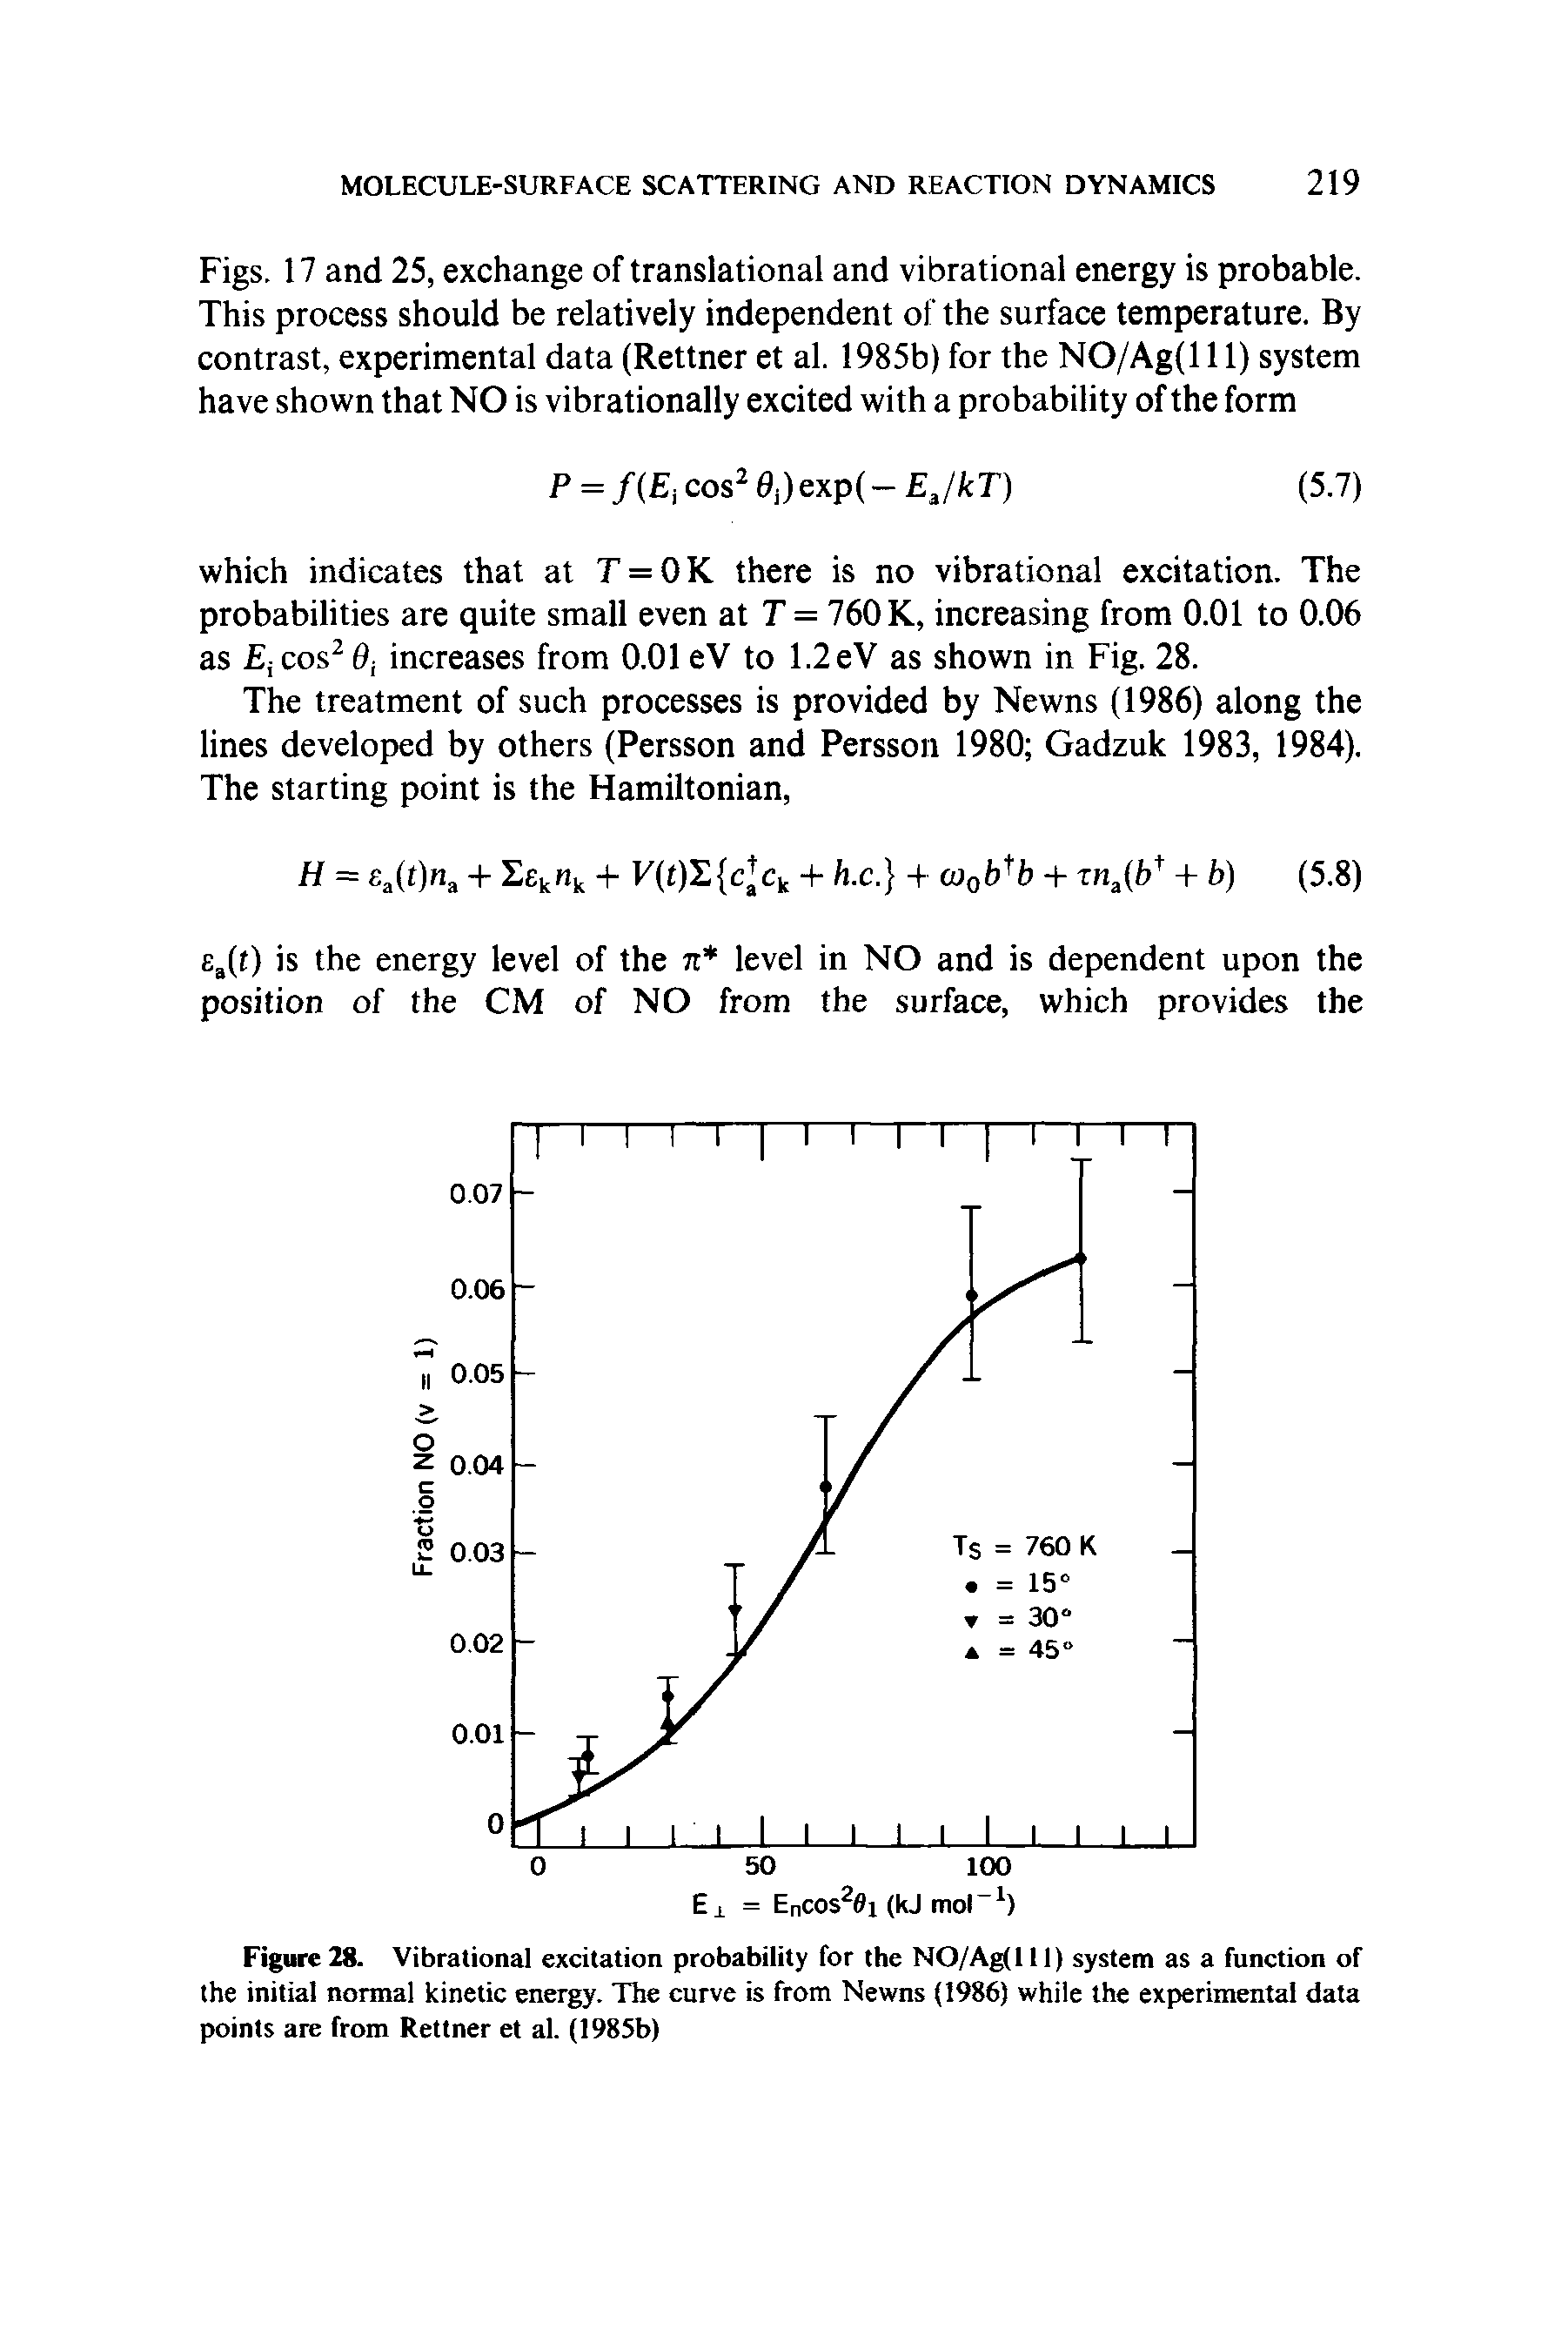 Figure 28. Vibrational excitation probability for the NO/Ag(IIl) system as a function of the initial normal kinetic energy. The curve is from Newns (1986) while the experimental data points are from Rettner et al. (1985b)...